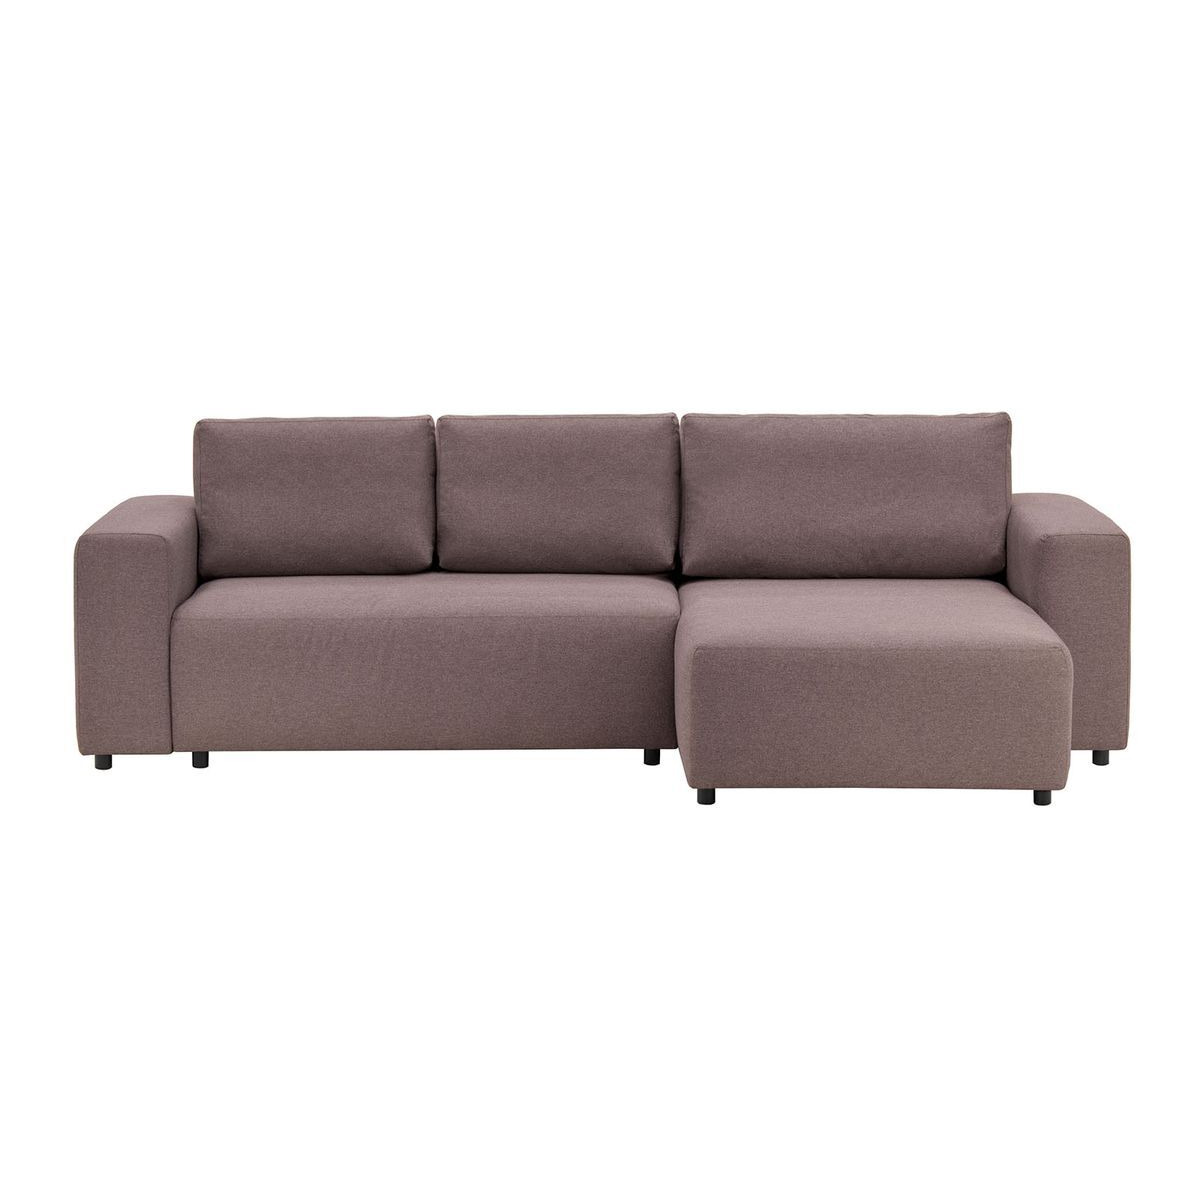 Solace Right Hand Corner Sofa Bed, mustard - image 1